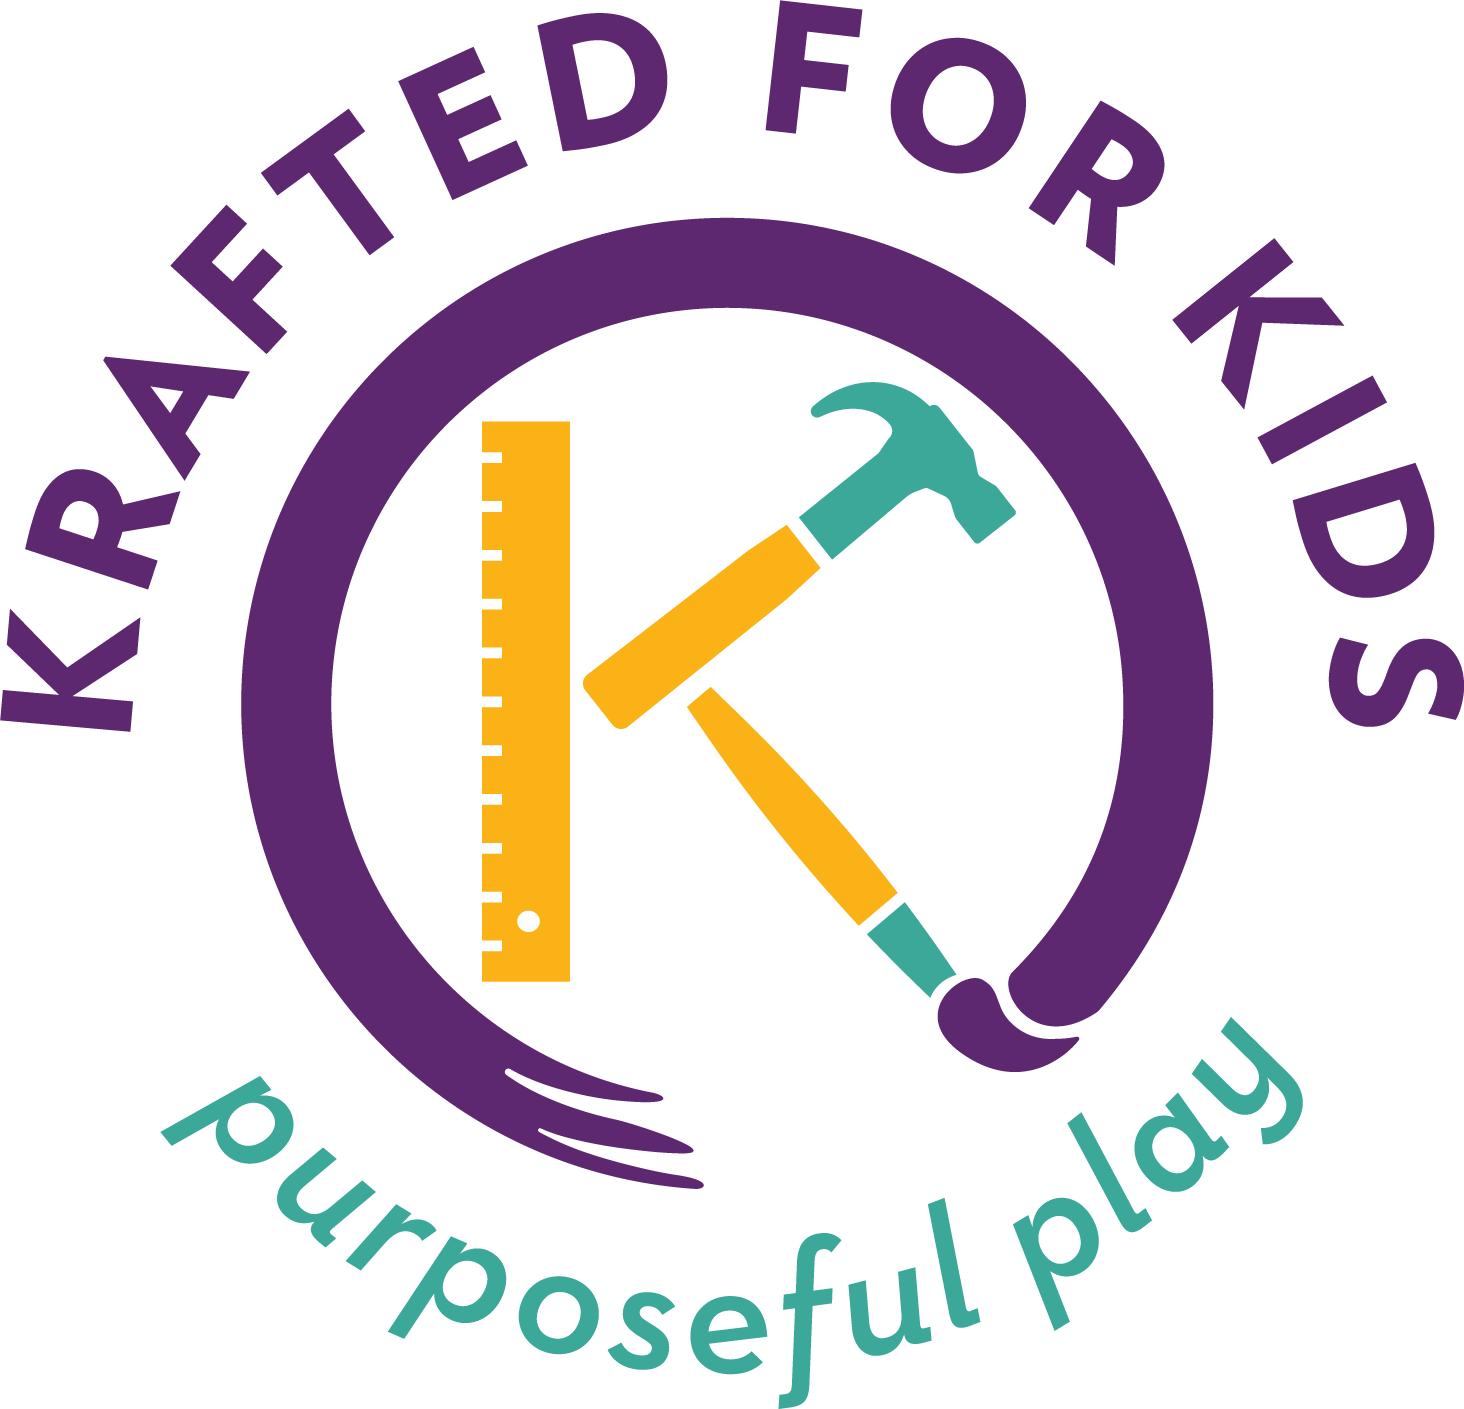 Krafted for Kids